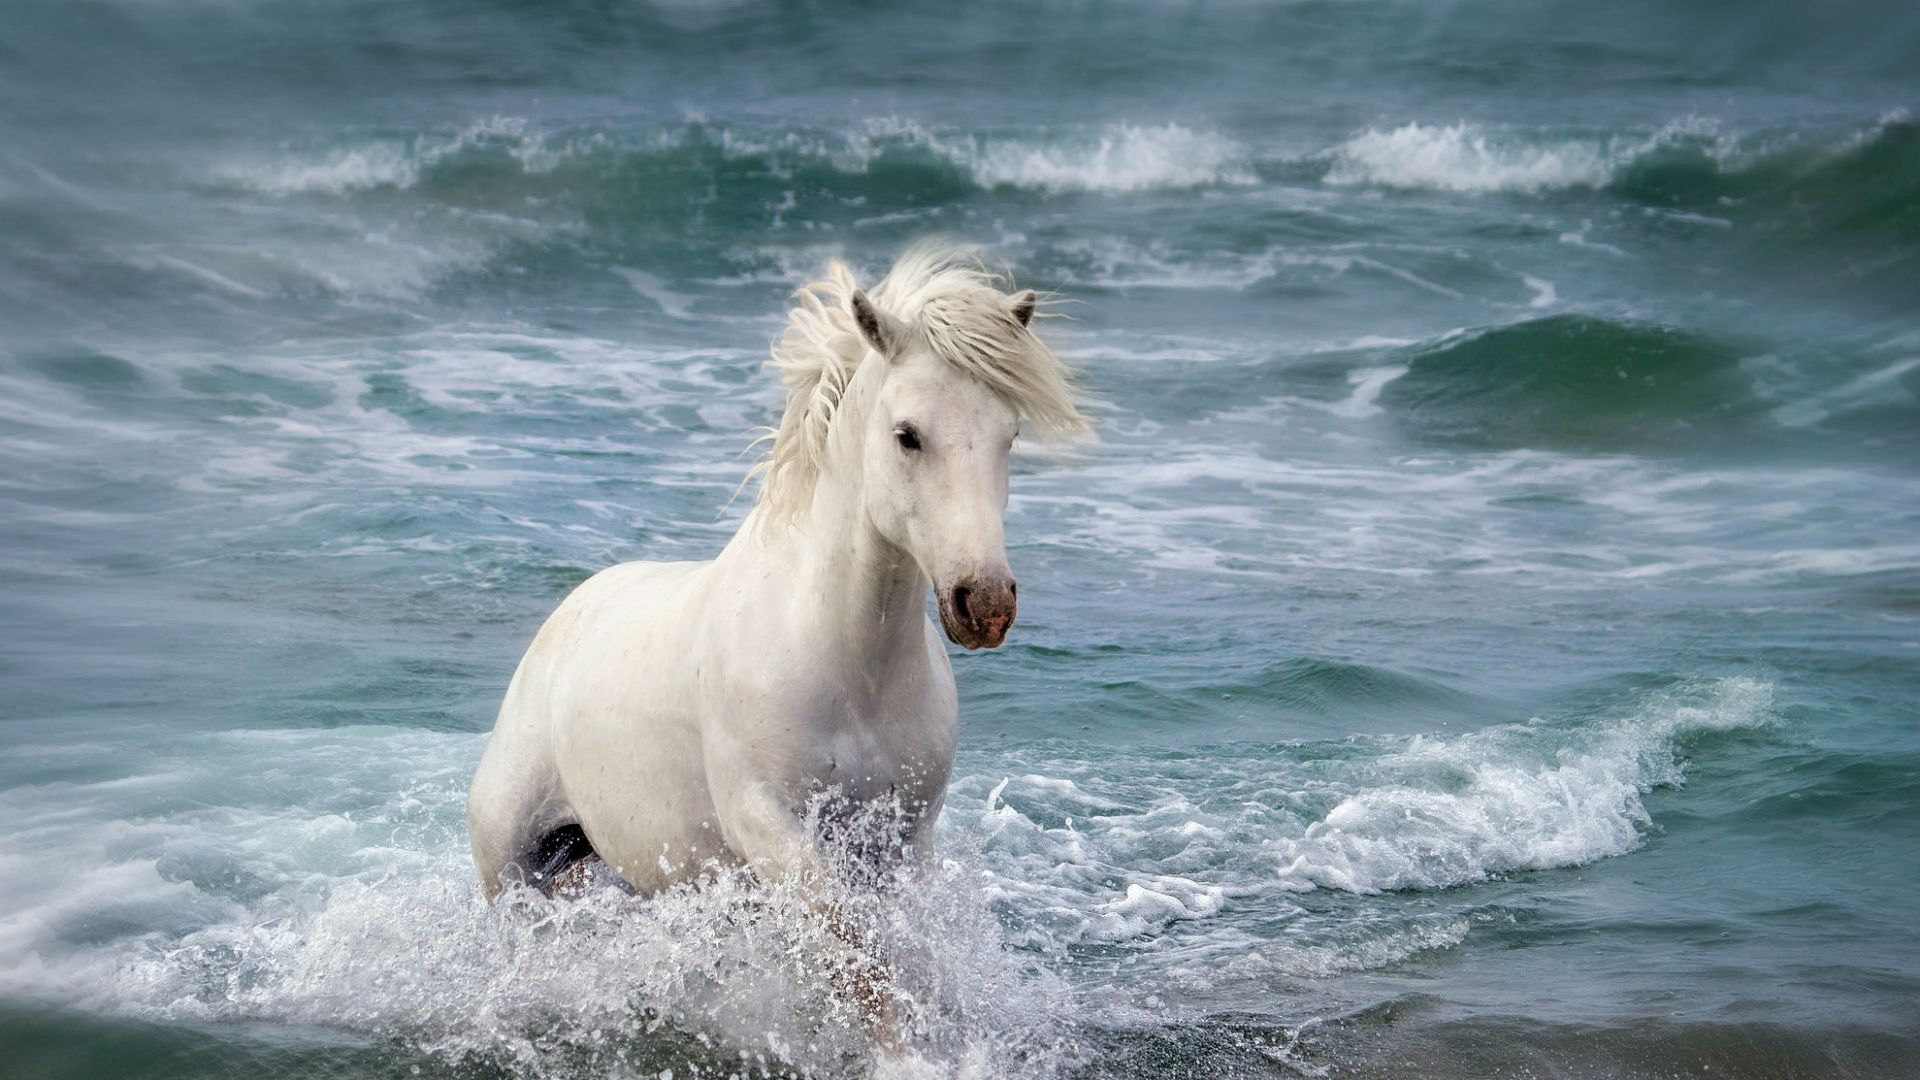 1920x1080 Desktop Wallpaper White Horse Running At Beach, Hd Image, Picture, Background, 6pppda